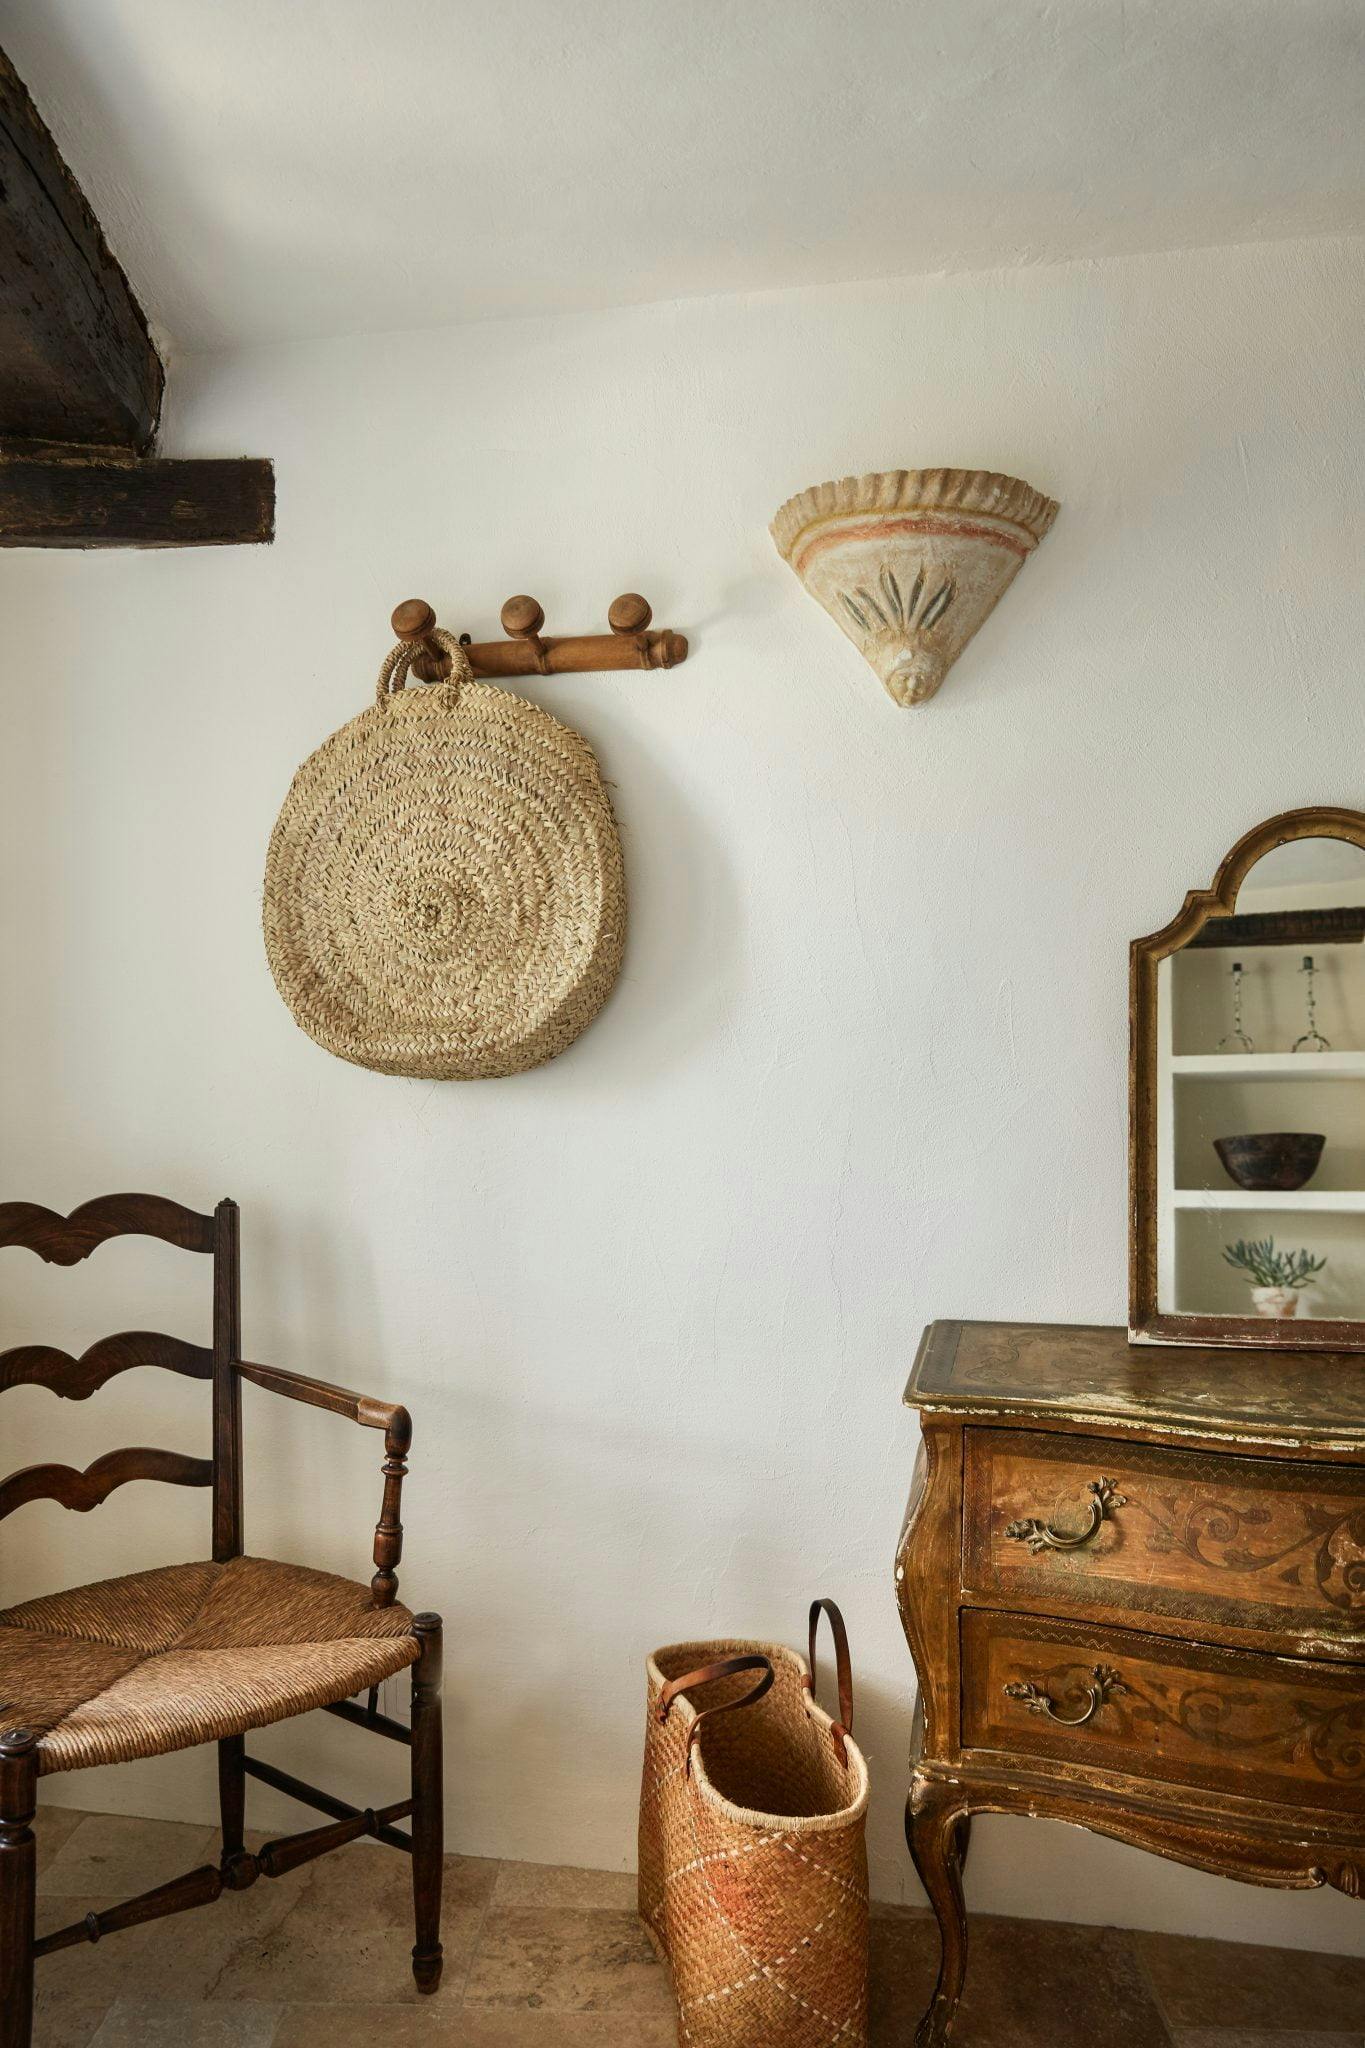 Bedroom detail: antique order, market basket and straw chair